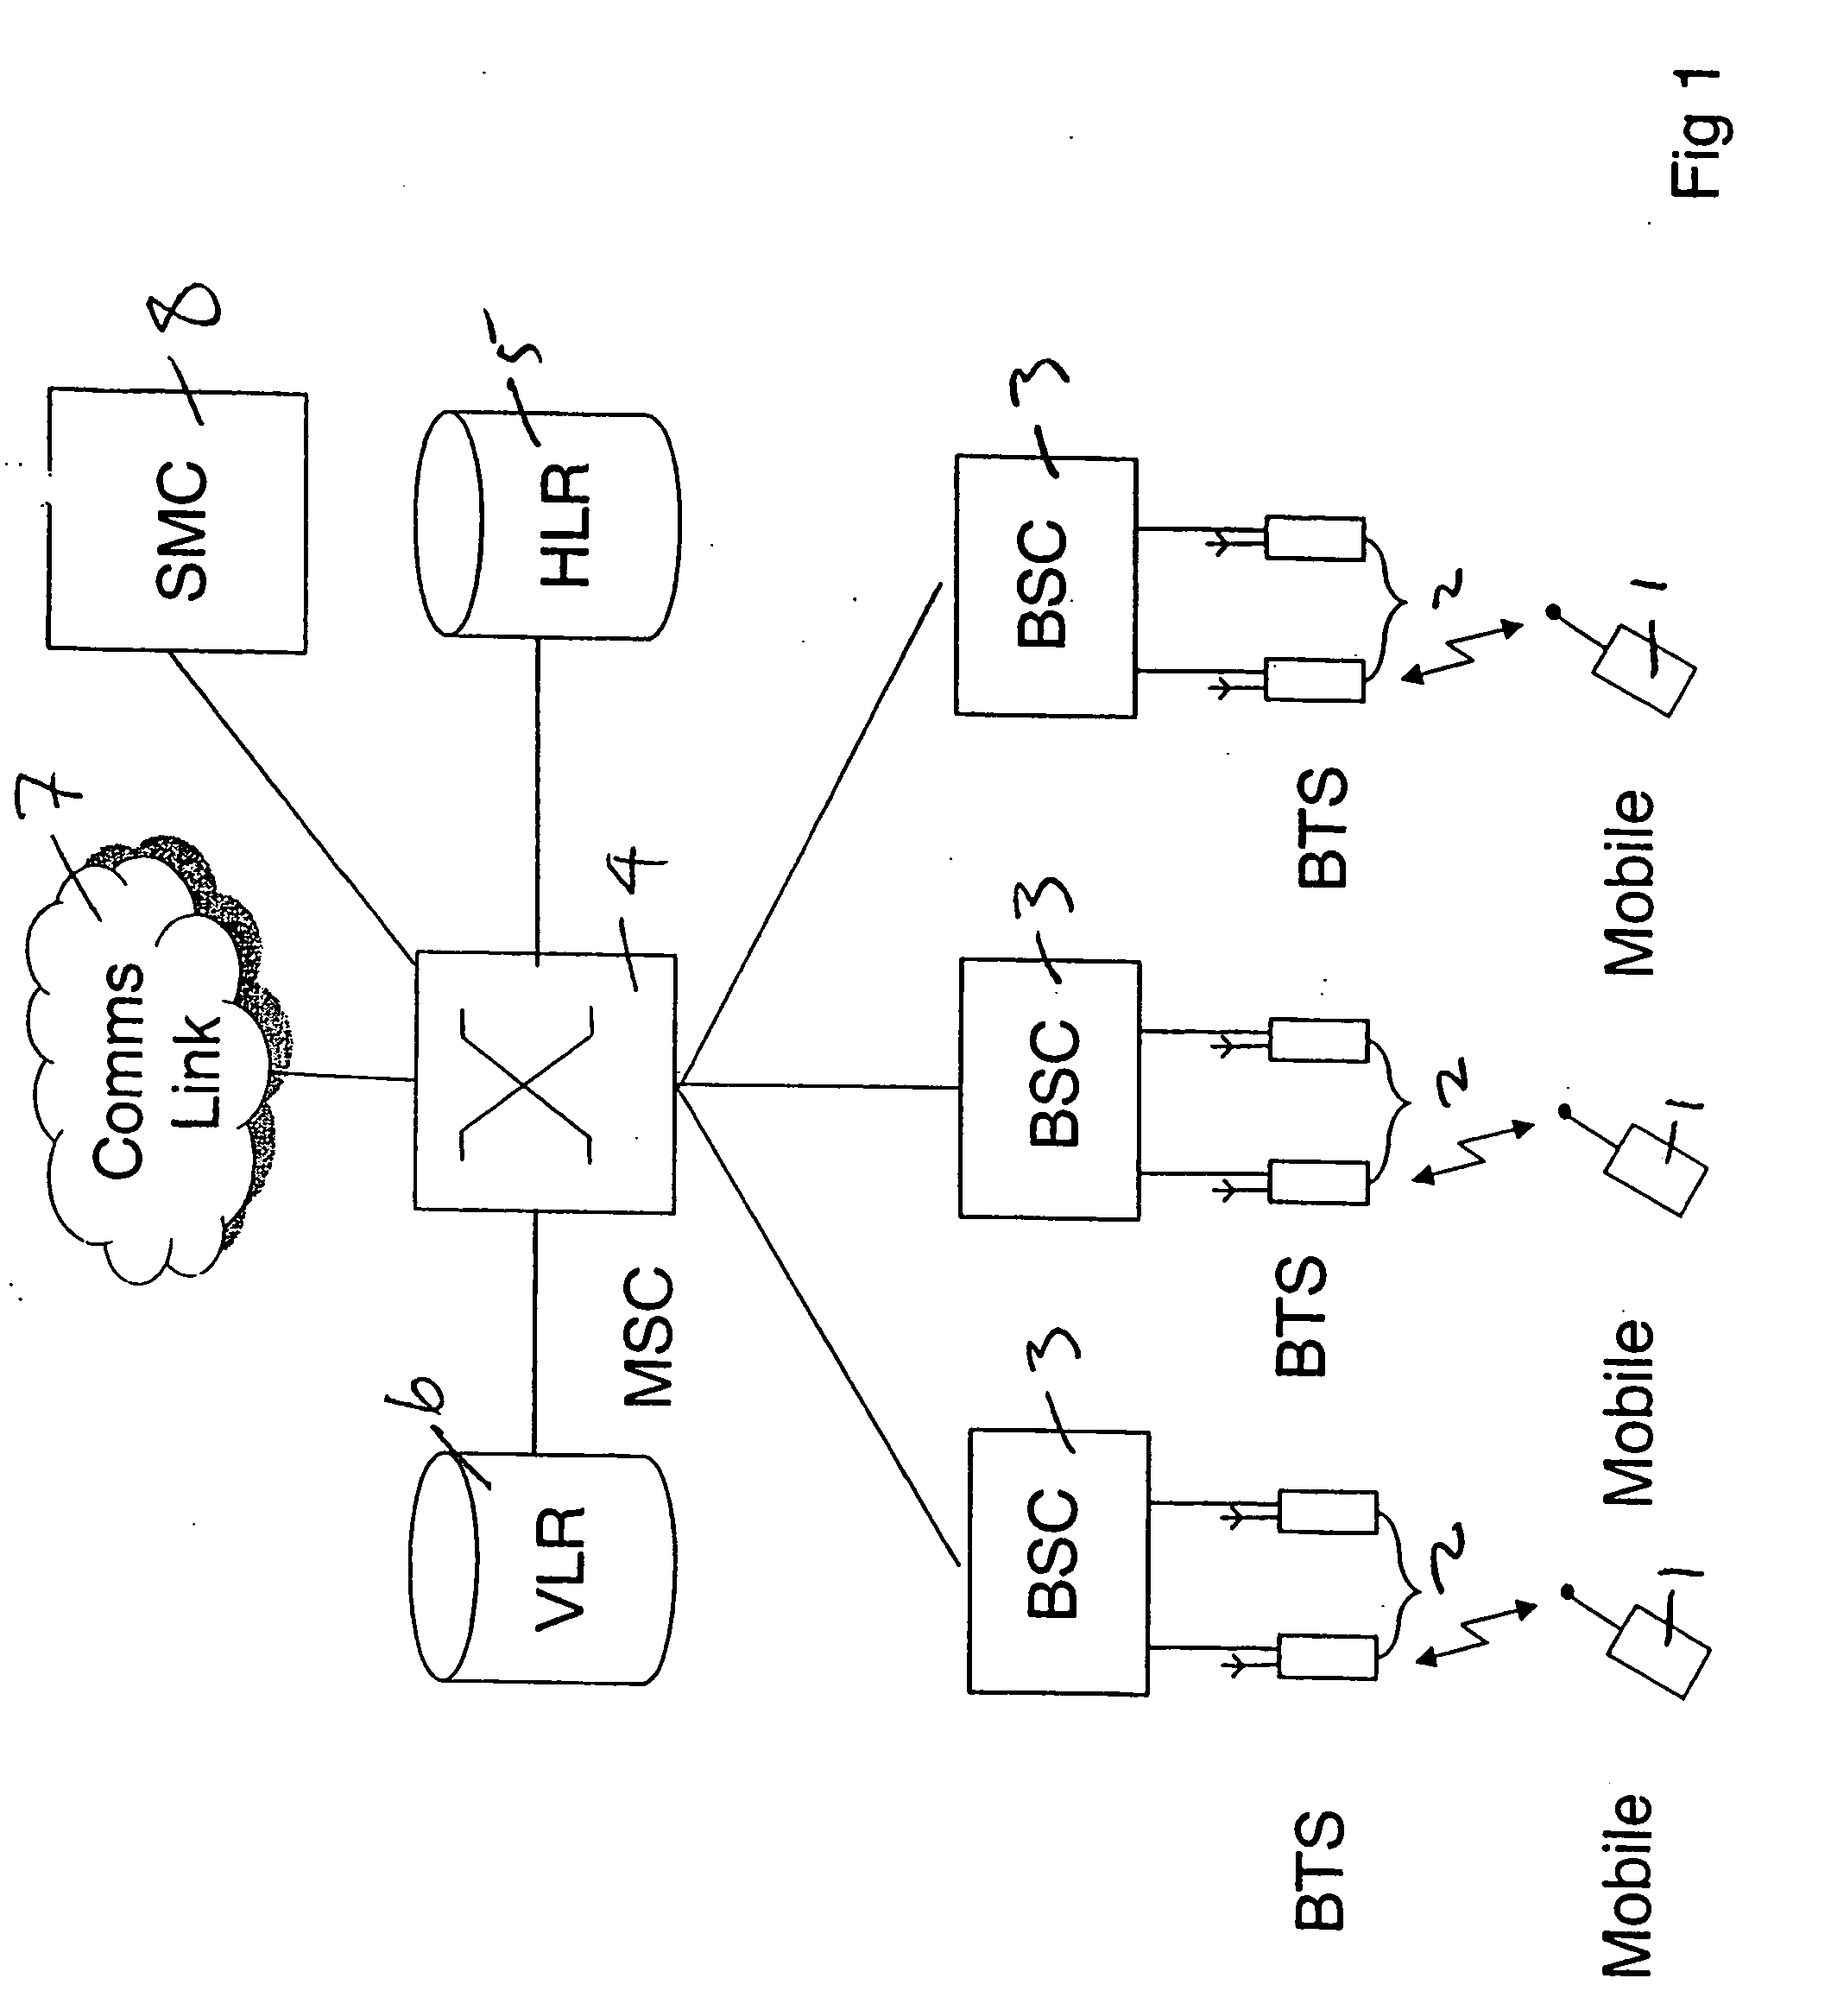 Provision of group services in a telecommunications network